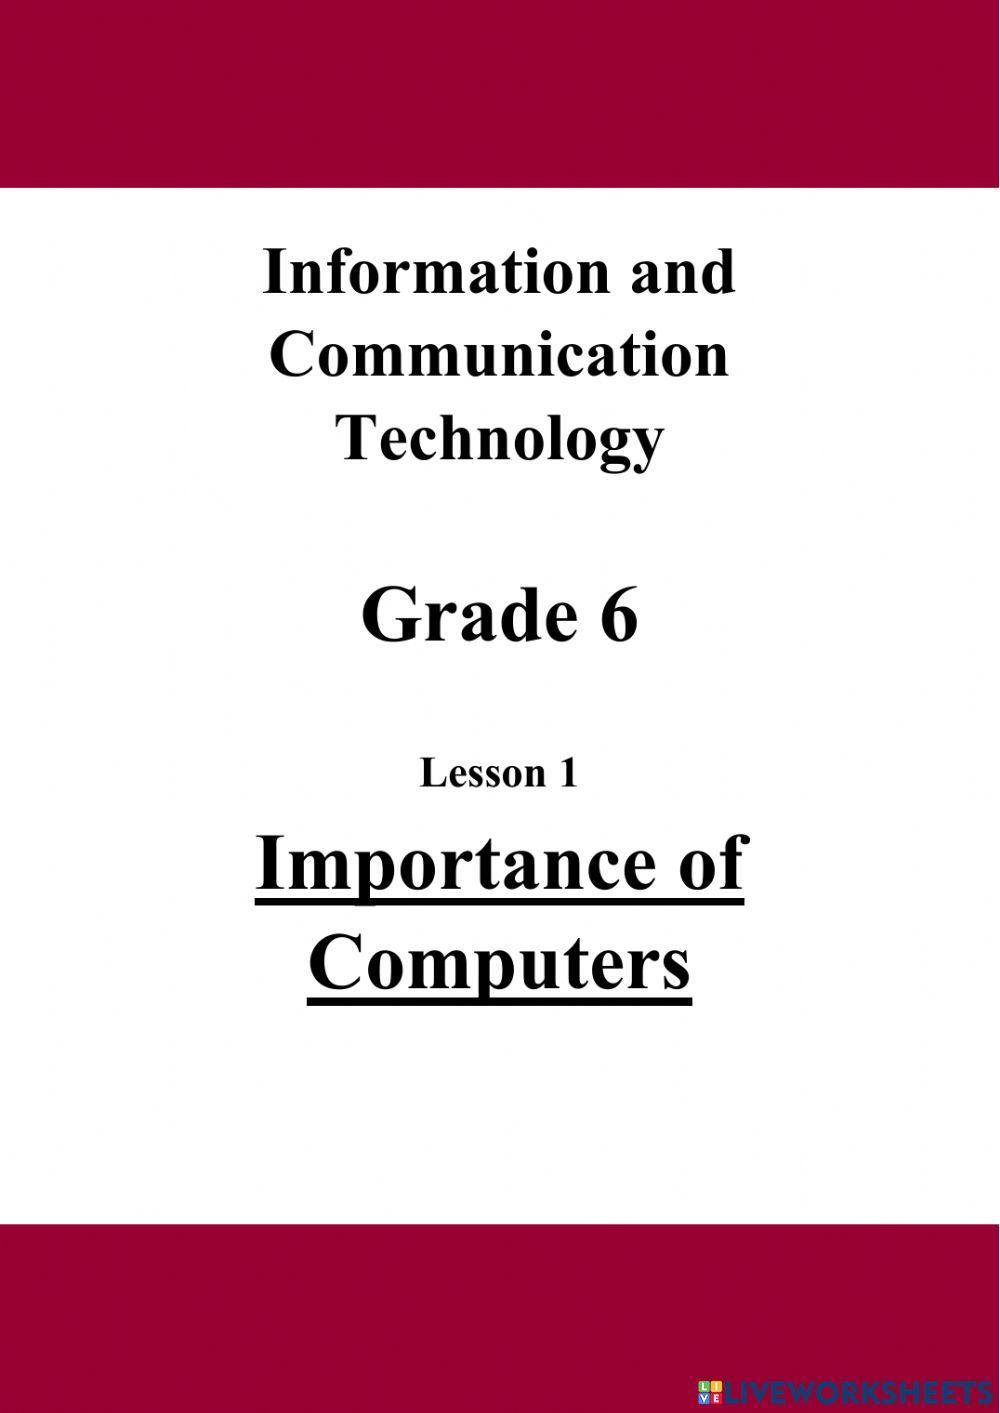 Importance of computers